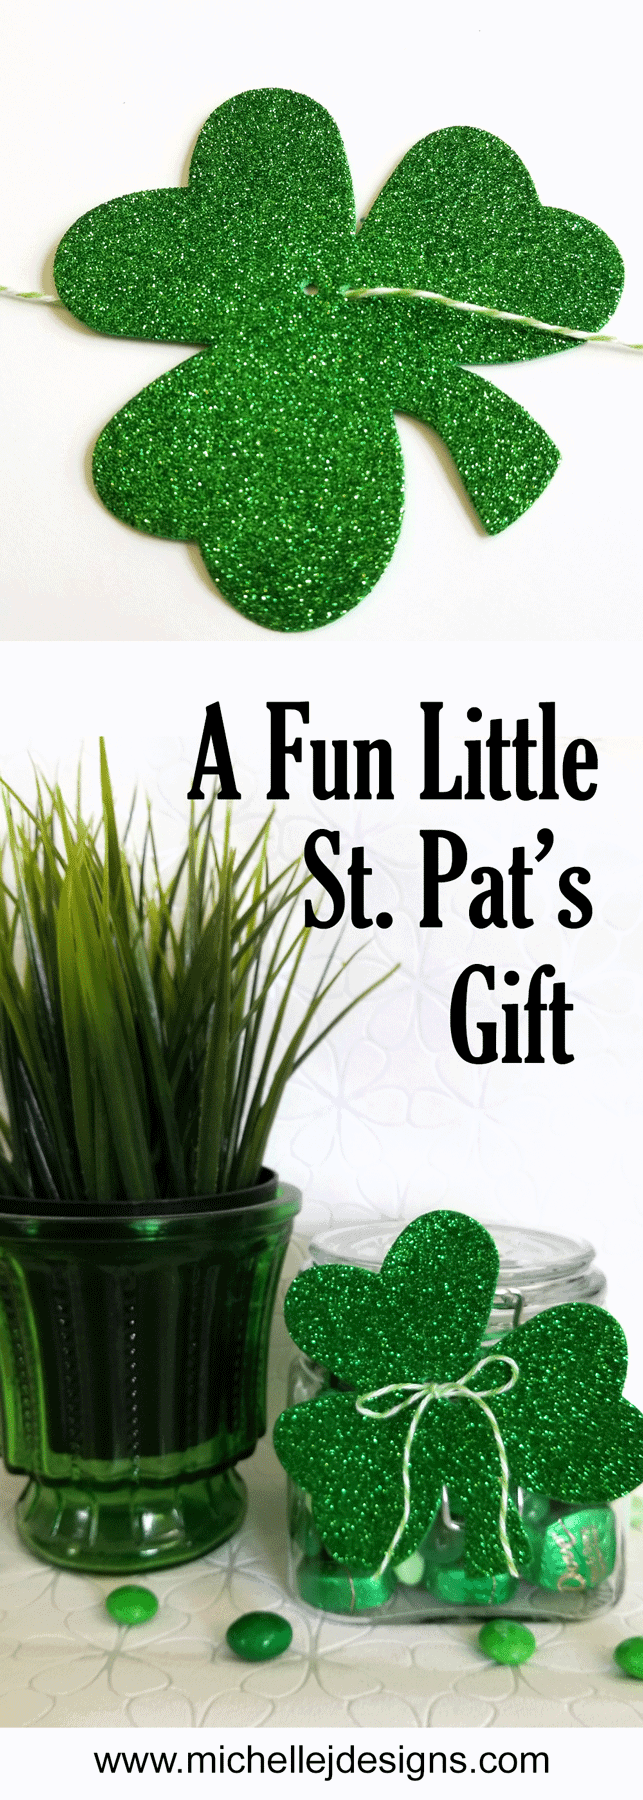 This isn't anything new but it is fun. A simple and fun St. Patrick's Day gift for one of your favorite friends! #stpats #stpatricksday #giftsinajar #jargifts - www.michellejdesigns.com